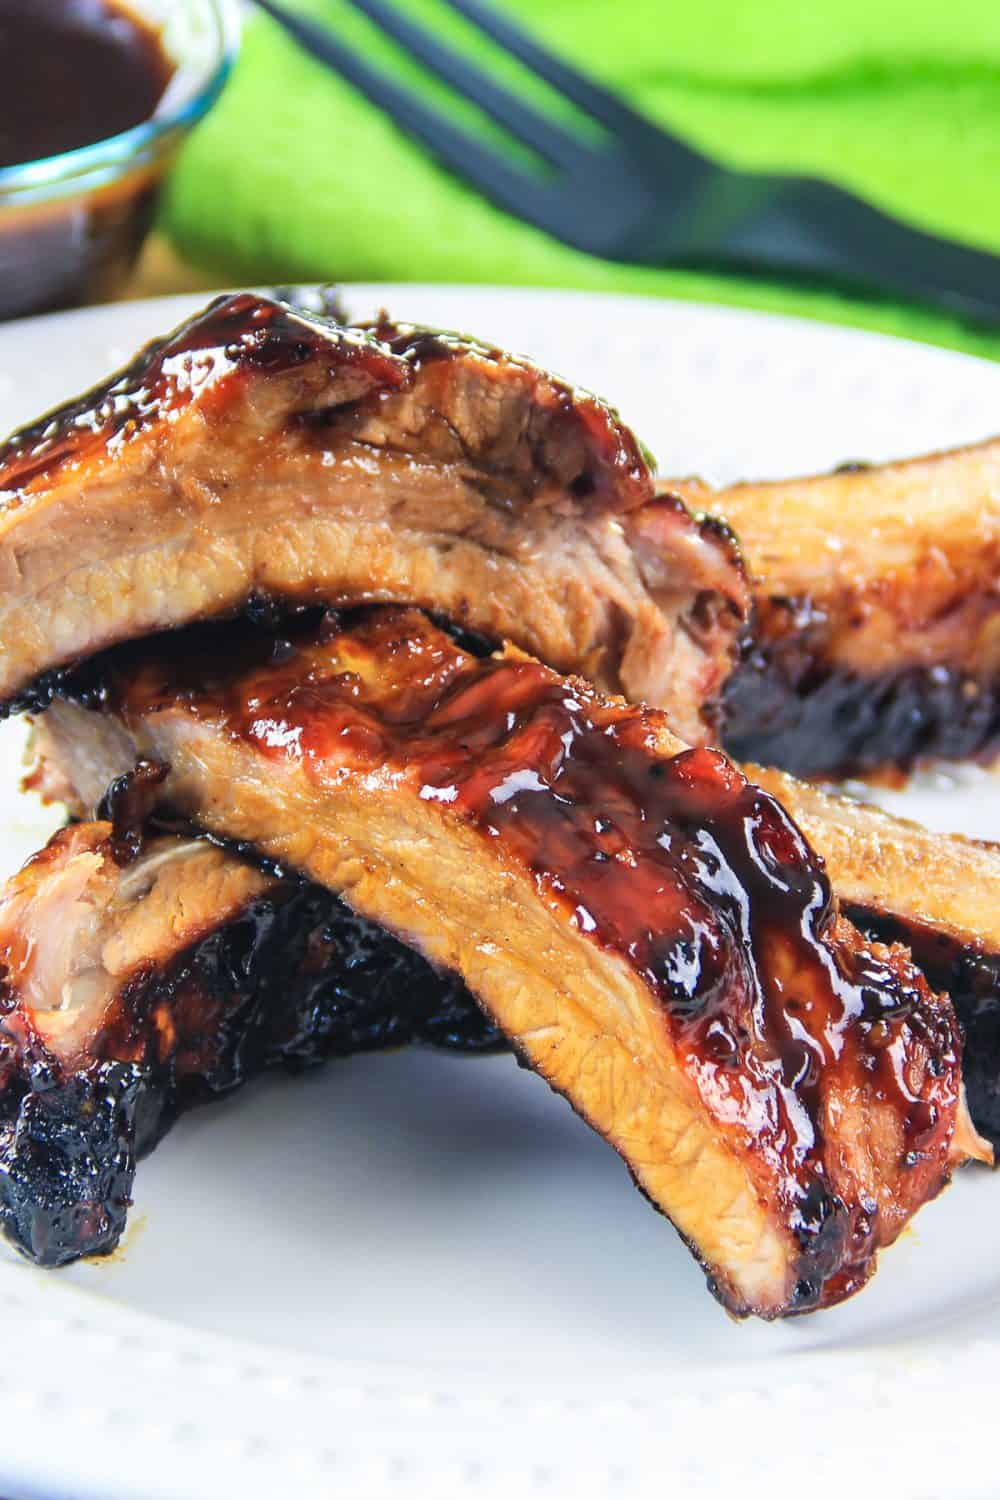 Barbecue Pork Ribs Simply Home Cooked,Ashley Furniture Reviews Google